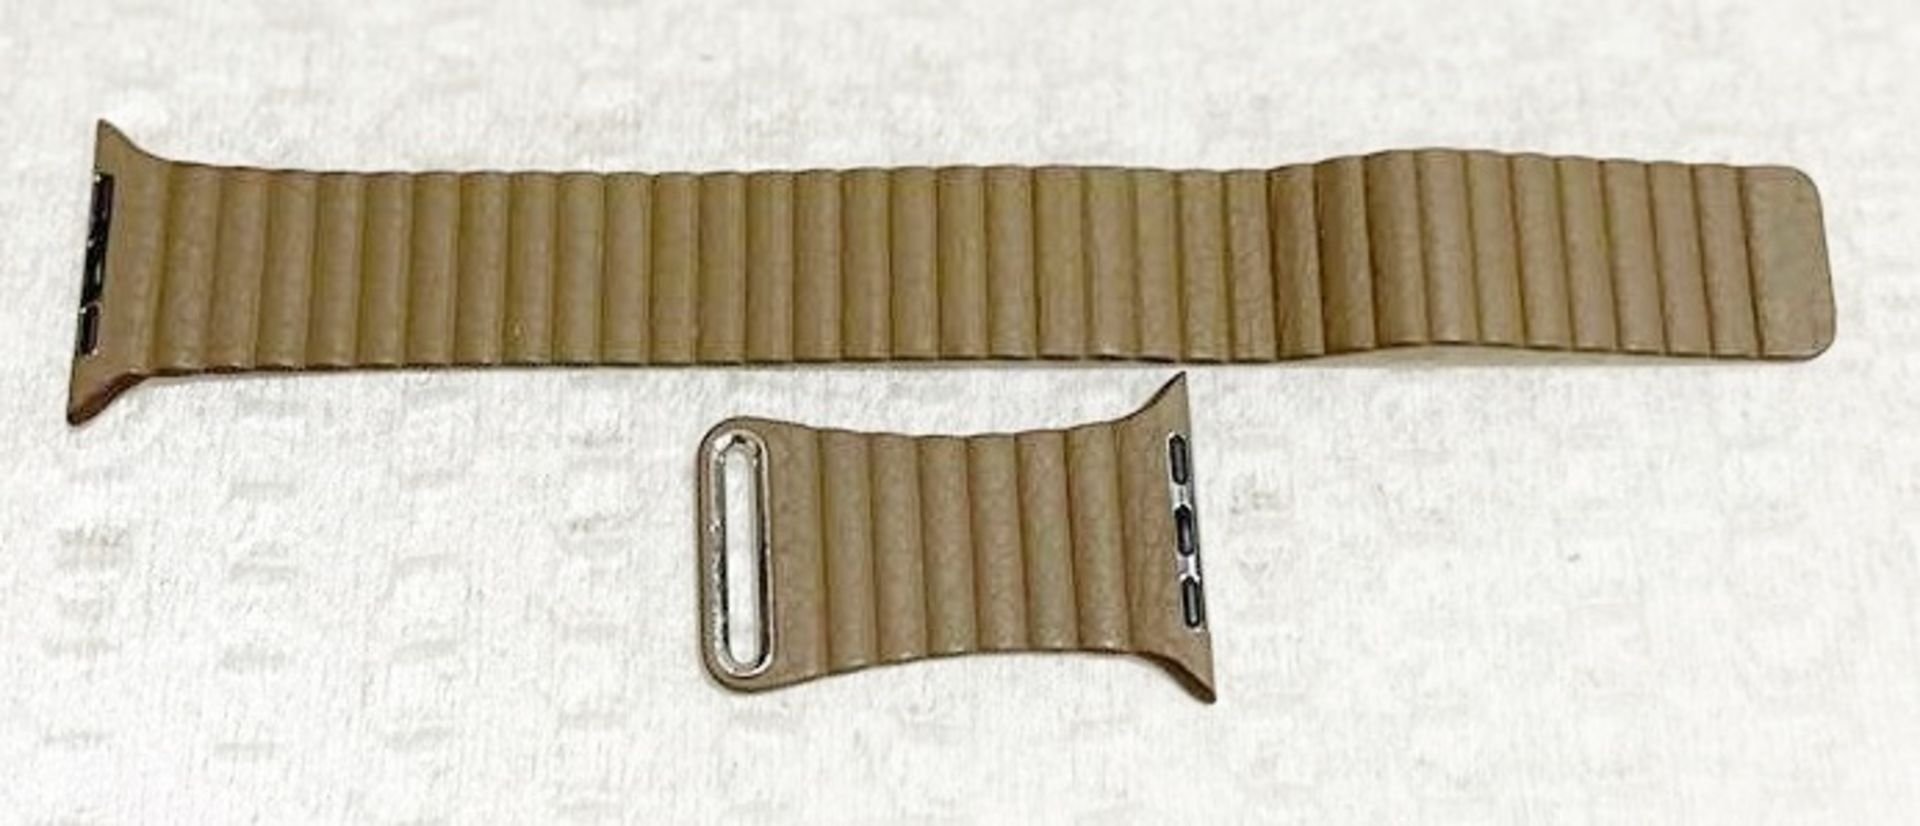 1 x APPLE WATCH Natural Leather 42mm Watch Strap - No VAT on the Hammer - CL712 - Ref: MPC852  - - Image 2 of 4